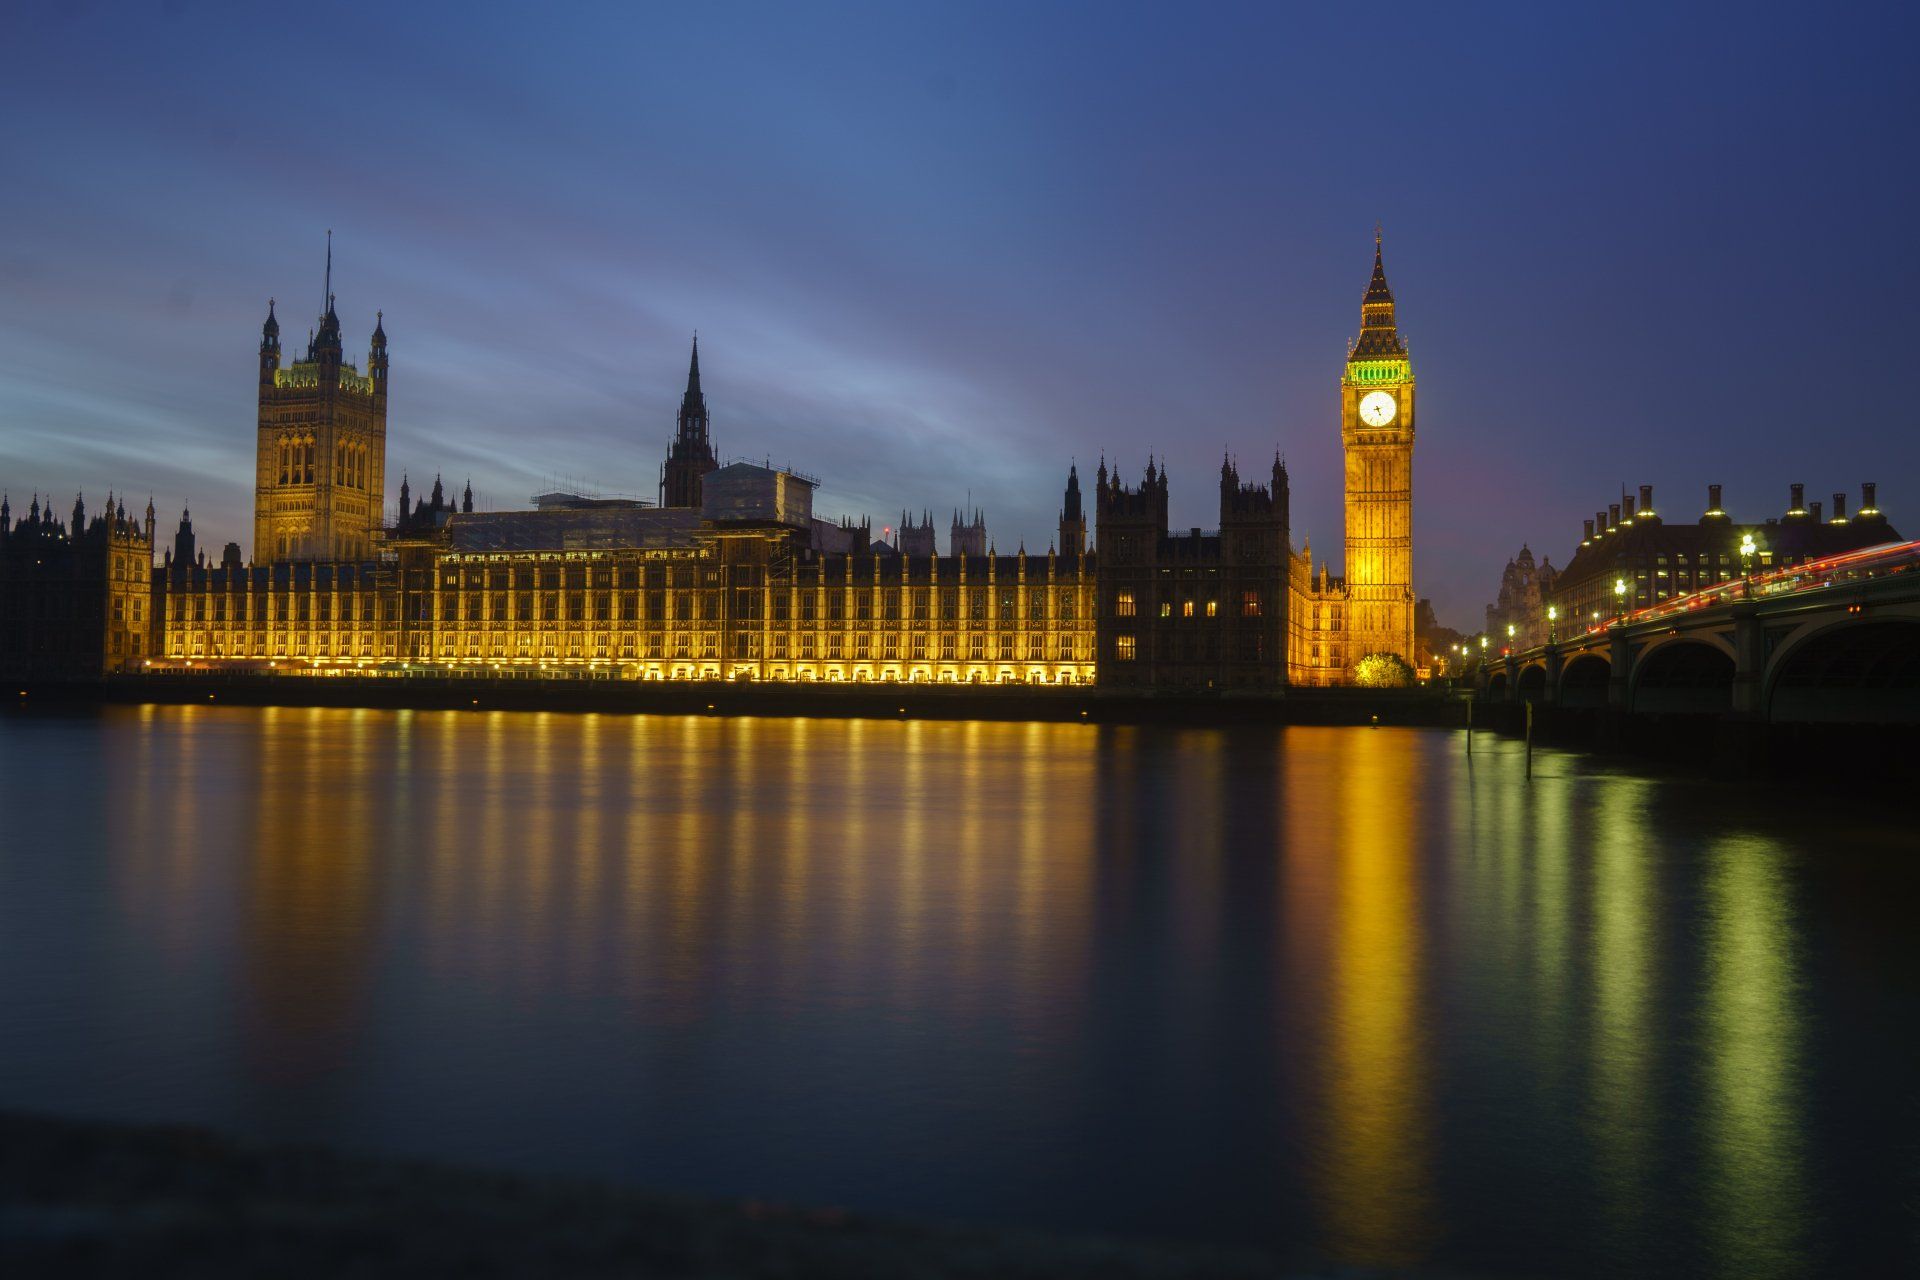 The UK houses of parliament at night